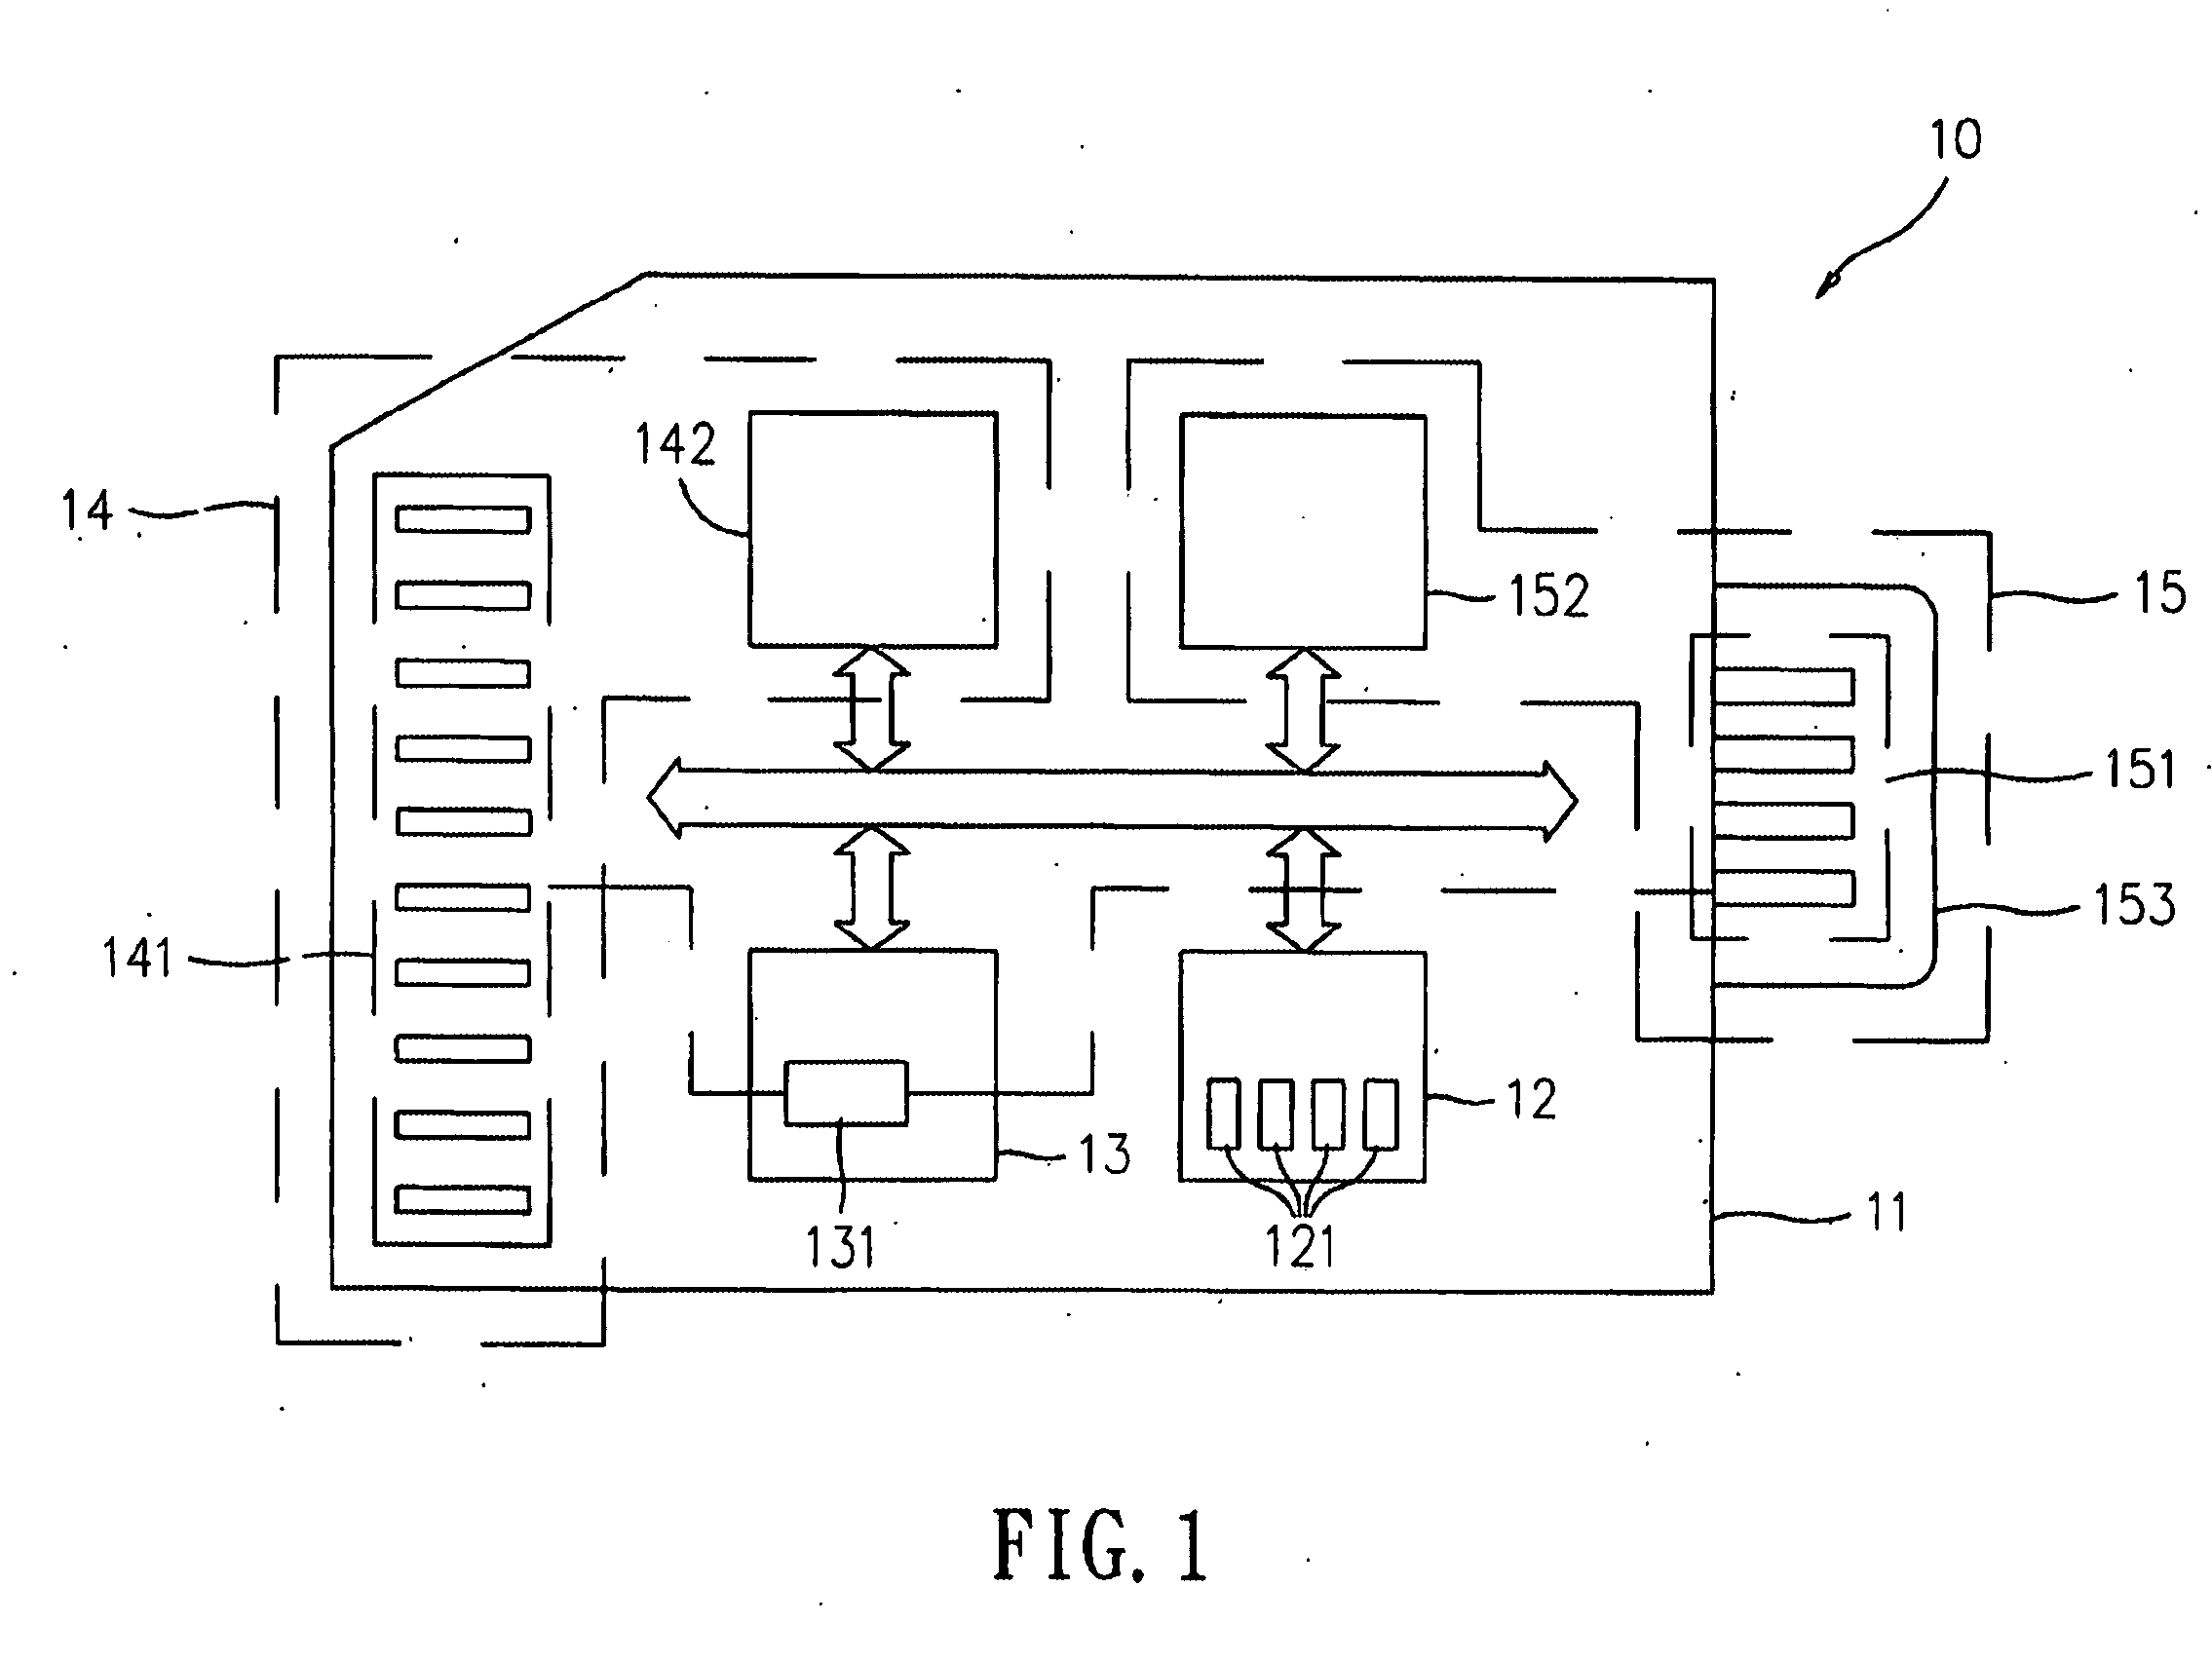 Portable memory device with multiple I/O interfaces